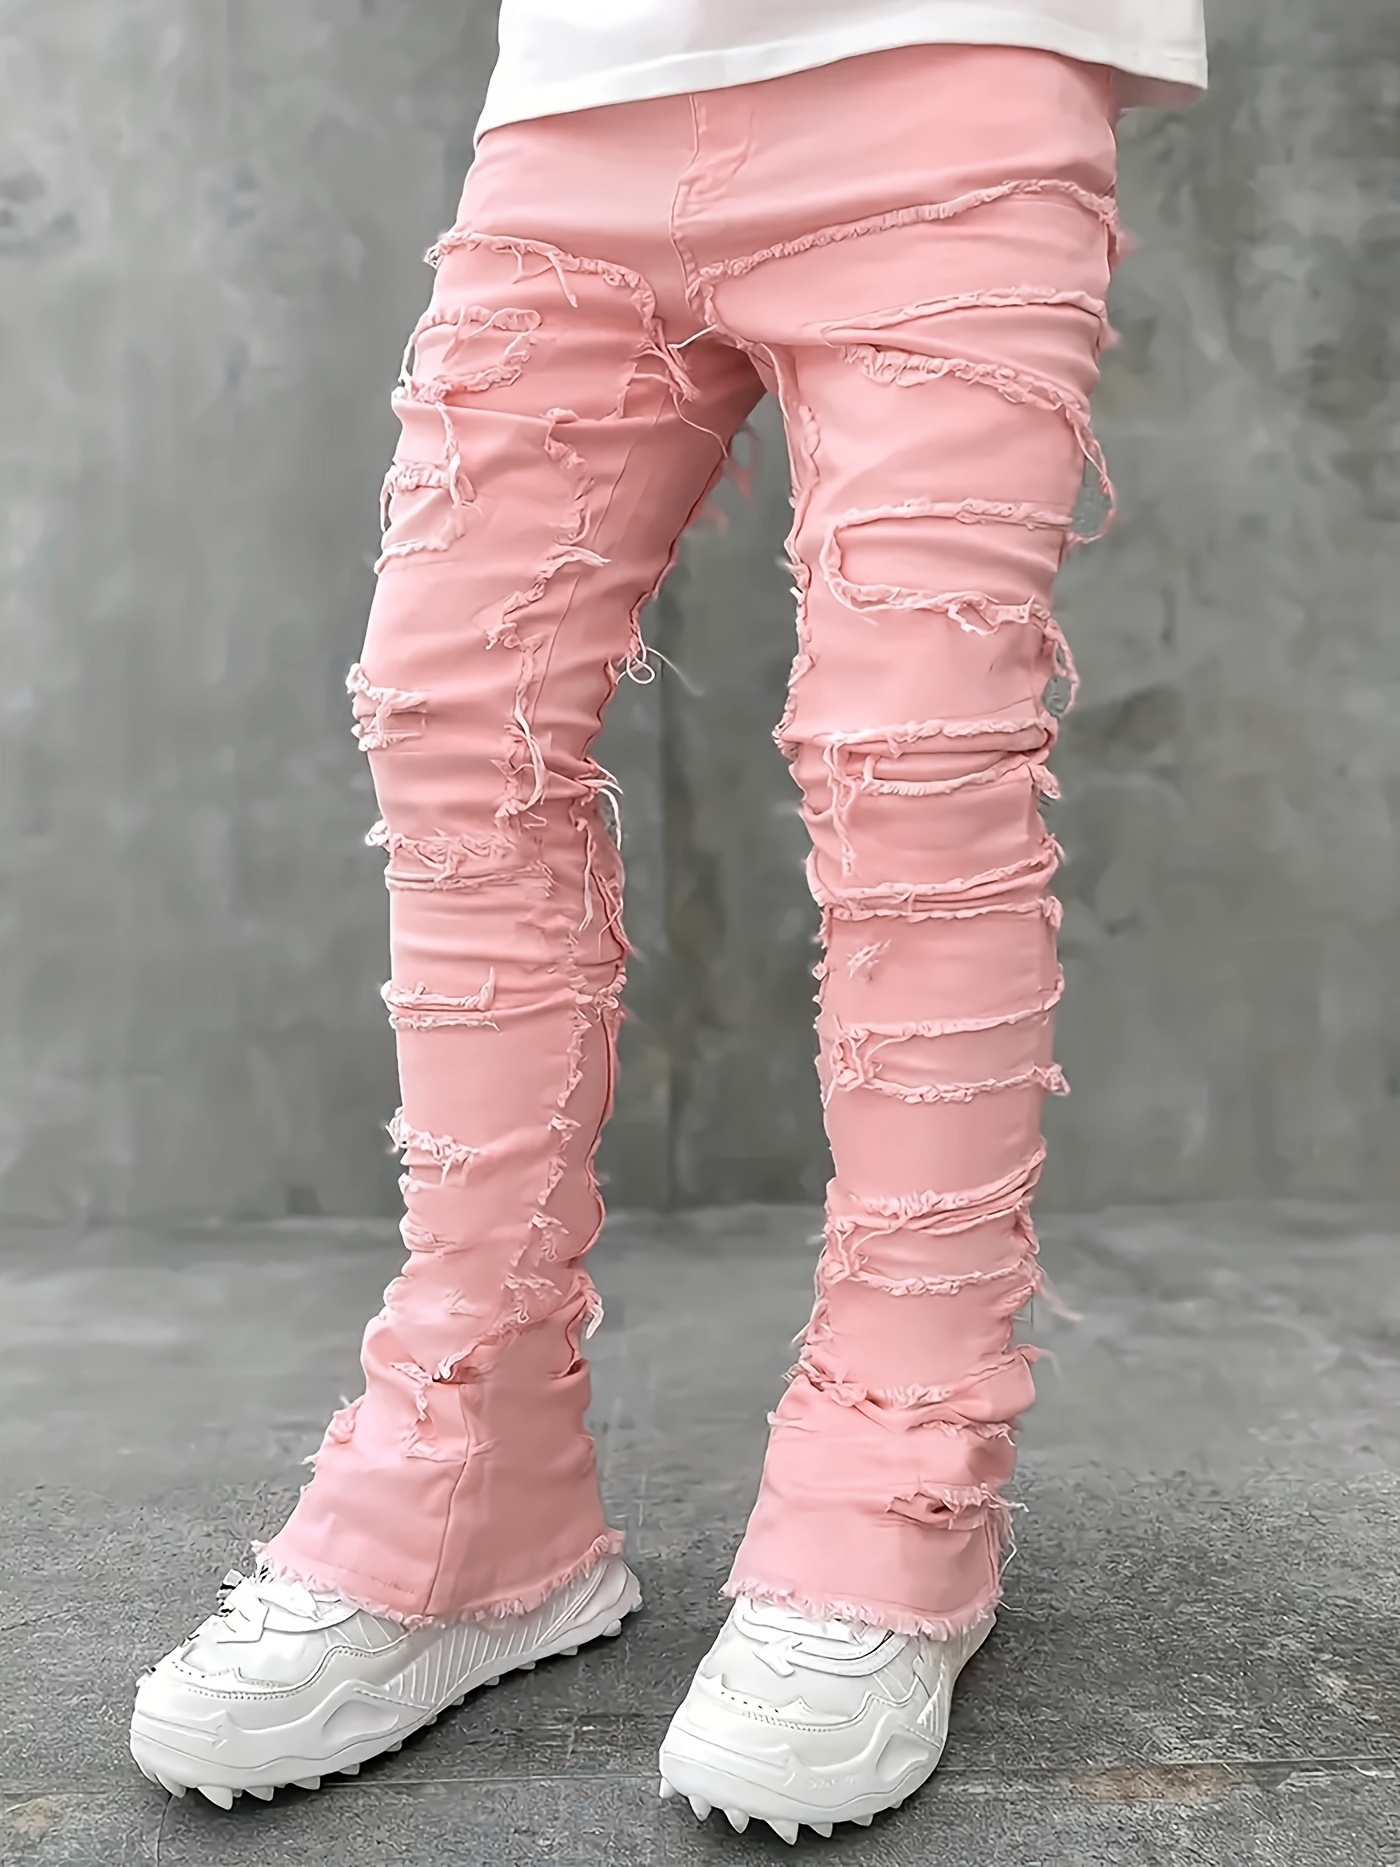 High Waist Casual Pink Wide Leg Jeans Pants  Light pink pants, Pink ripped  jeans, Fun pants